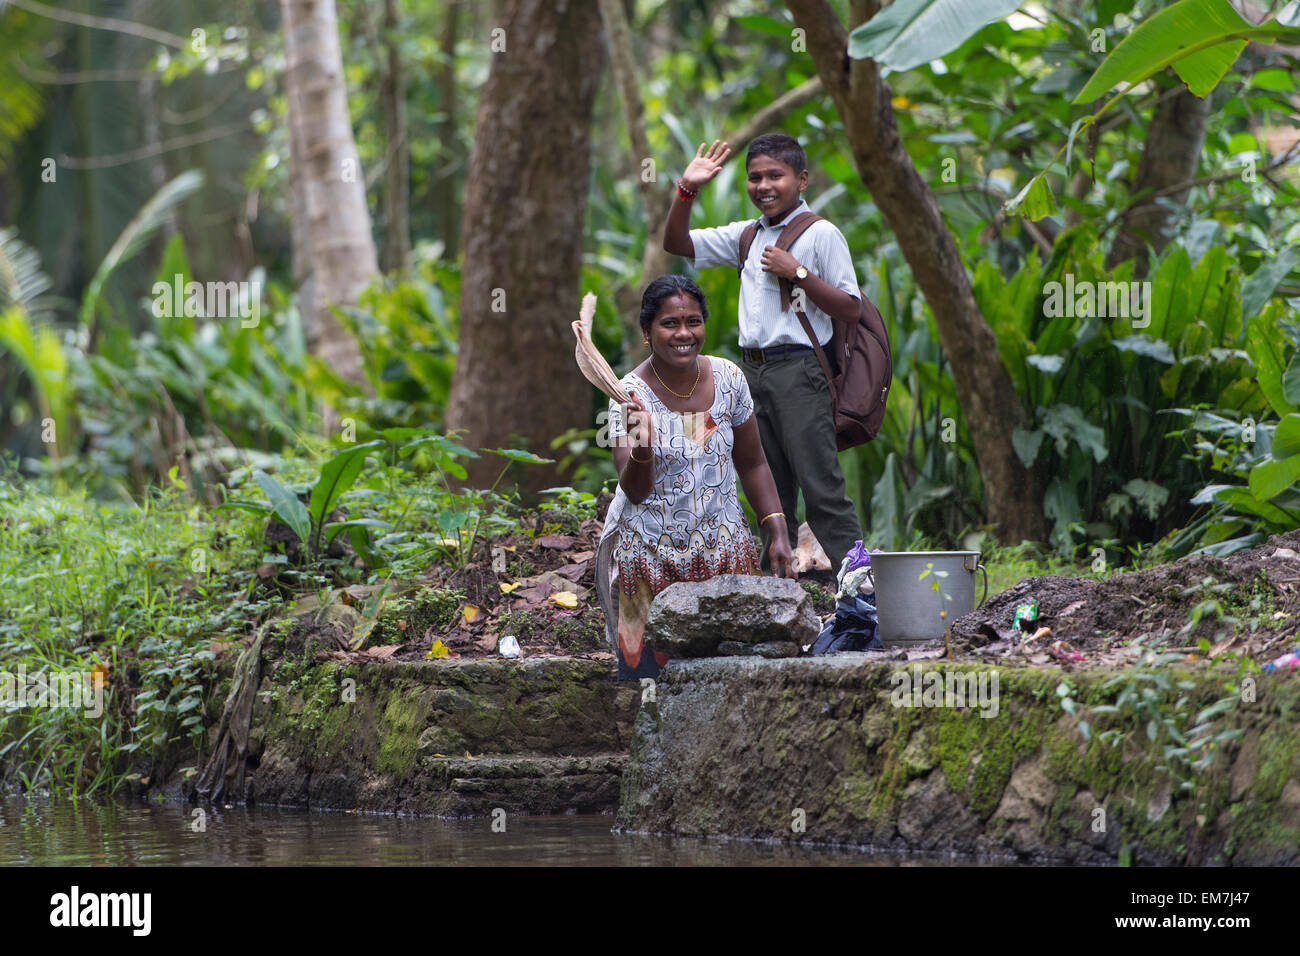 Woman and child waving, Backwaters canal system in Alappuzha, Kerala, India Stock Photo